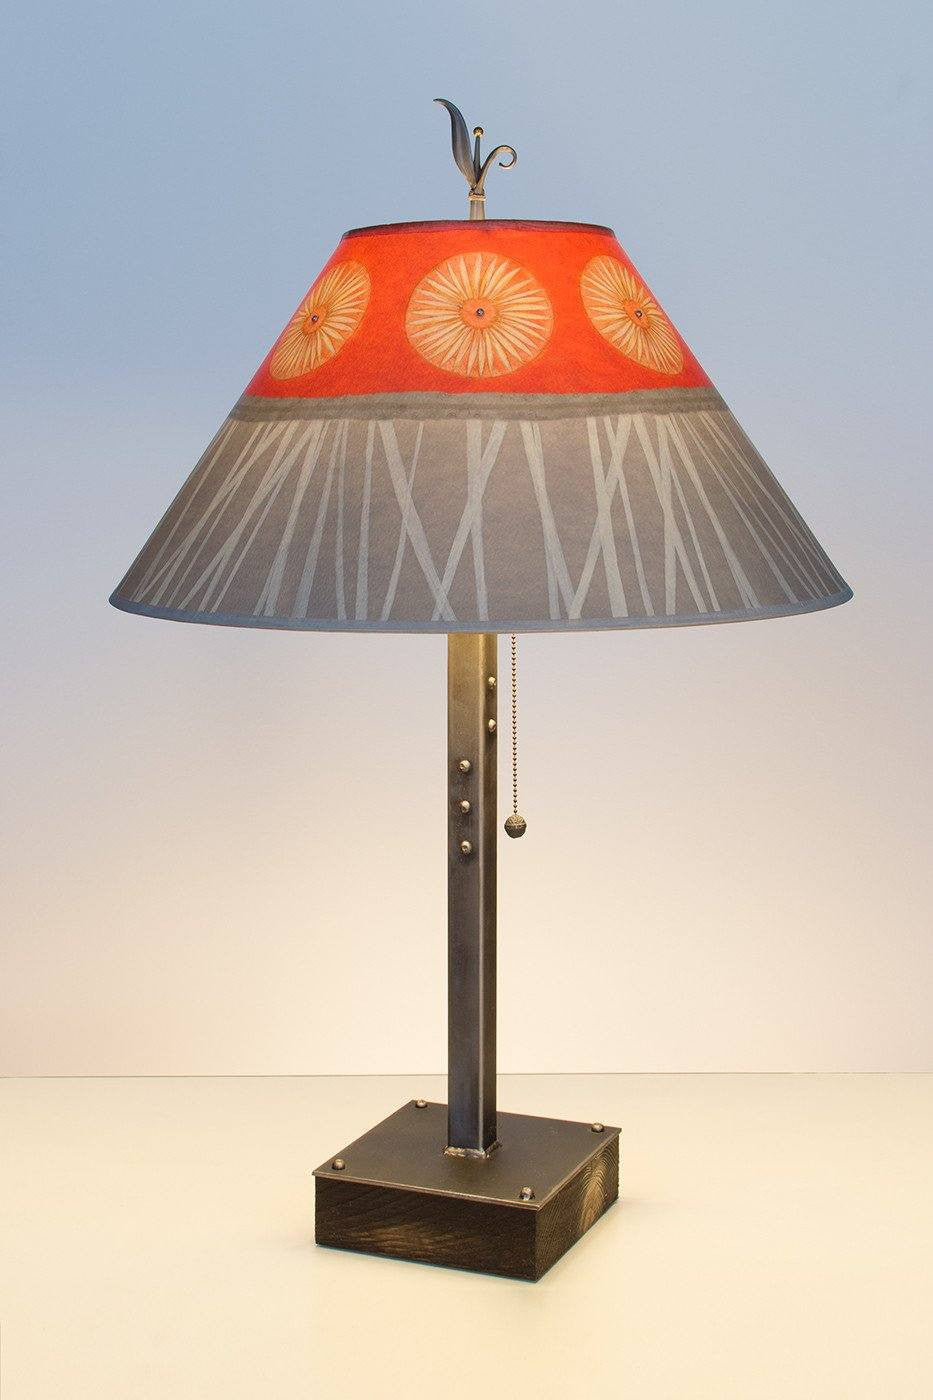 Janna Ugone &amp; Co Table Lamps Steel Table Lamp on Wood with Large Conical Shade in Tang